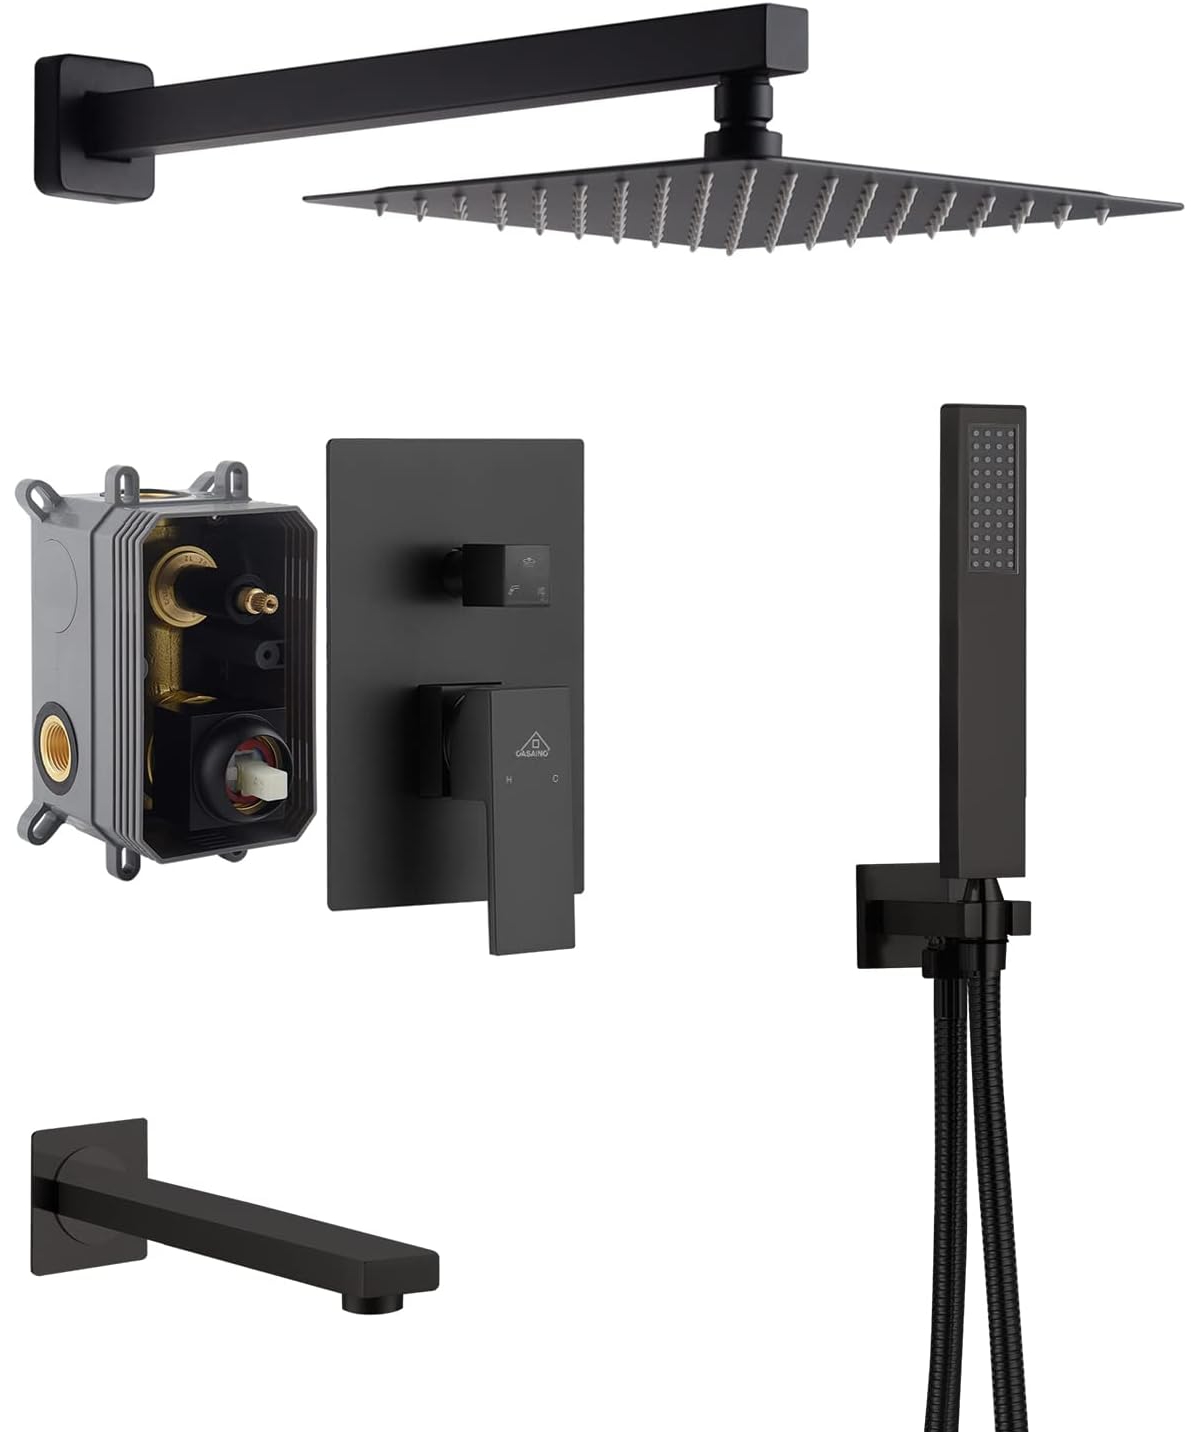 10" Inch Wall Mounted Square Shower System Set with Handheld Spray & Tub Spout - Matte black